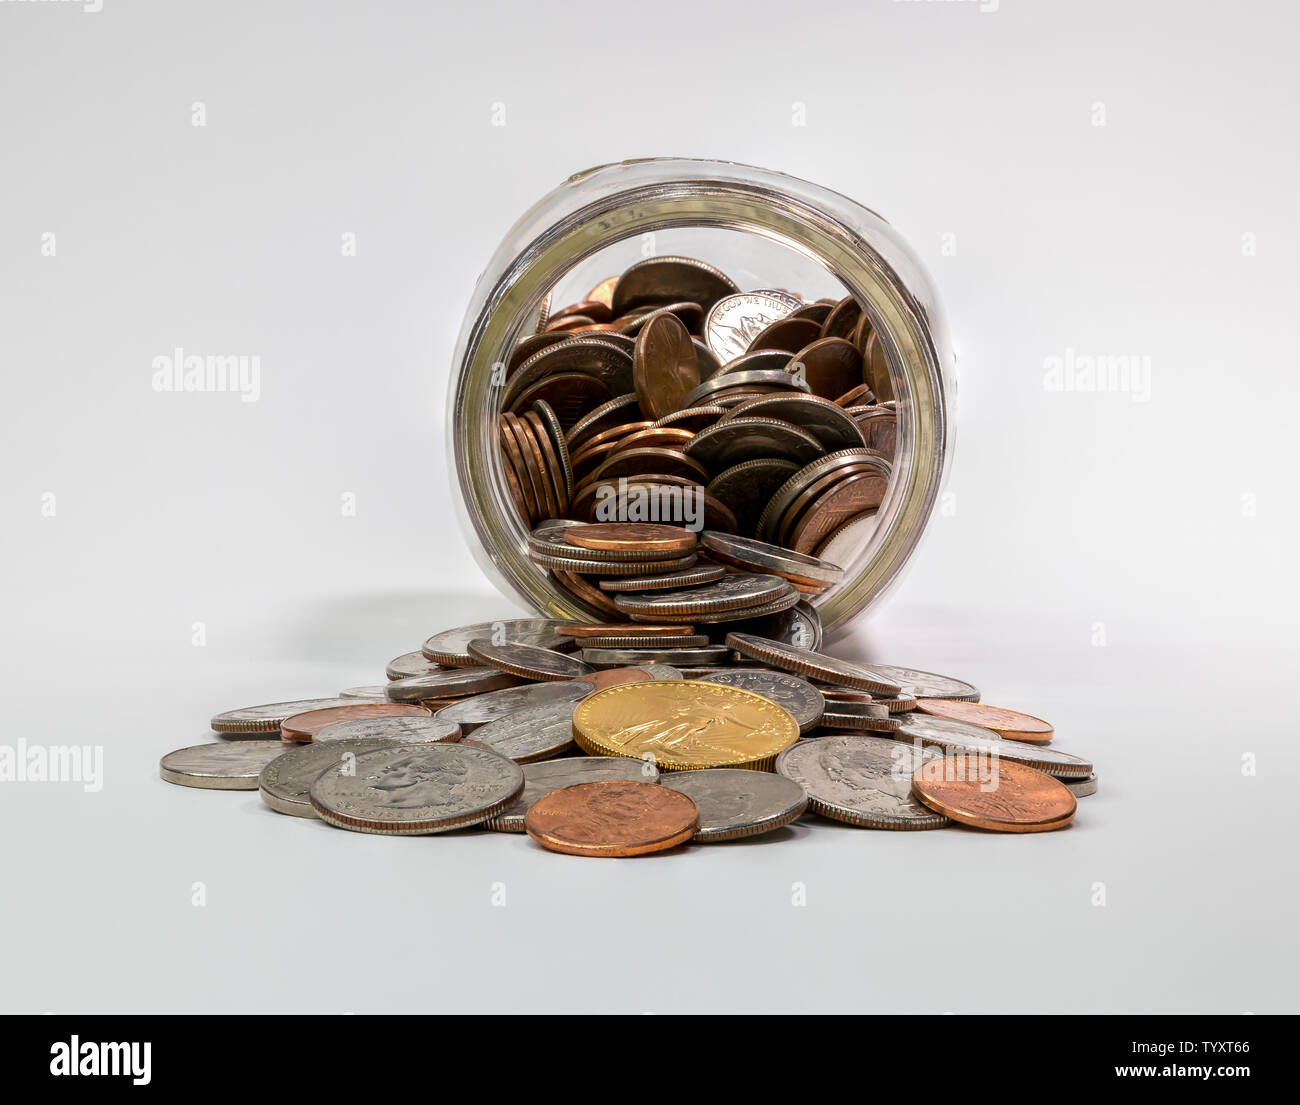 Spare change jar laying on its side with coins spilling out Stock Photo